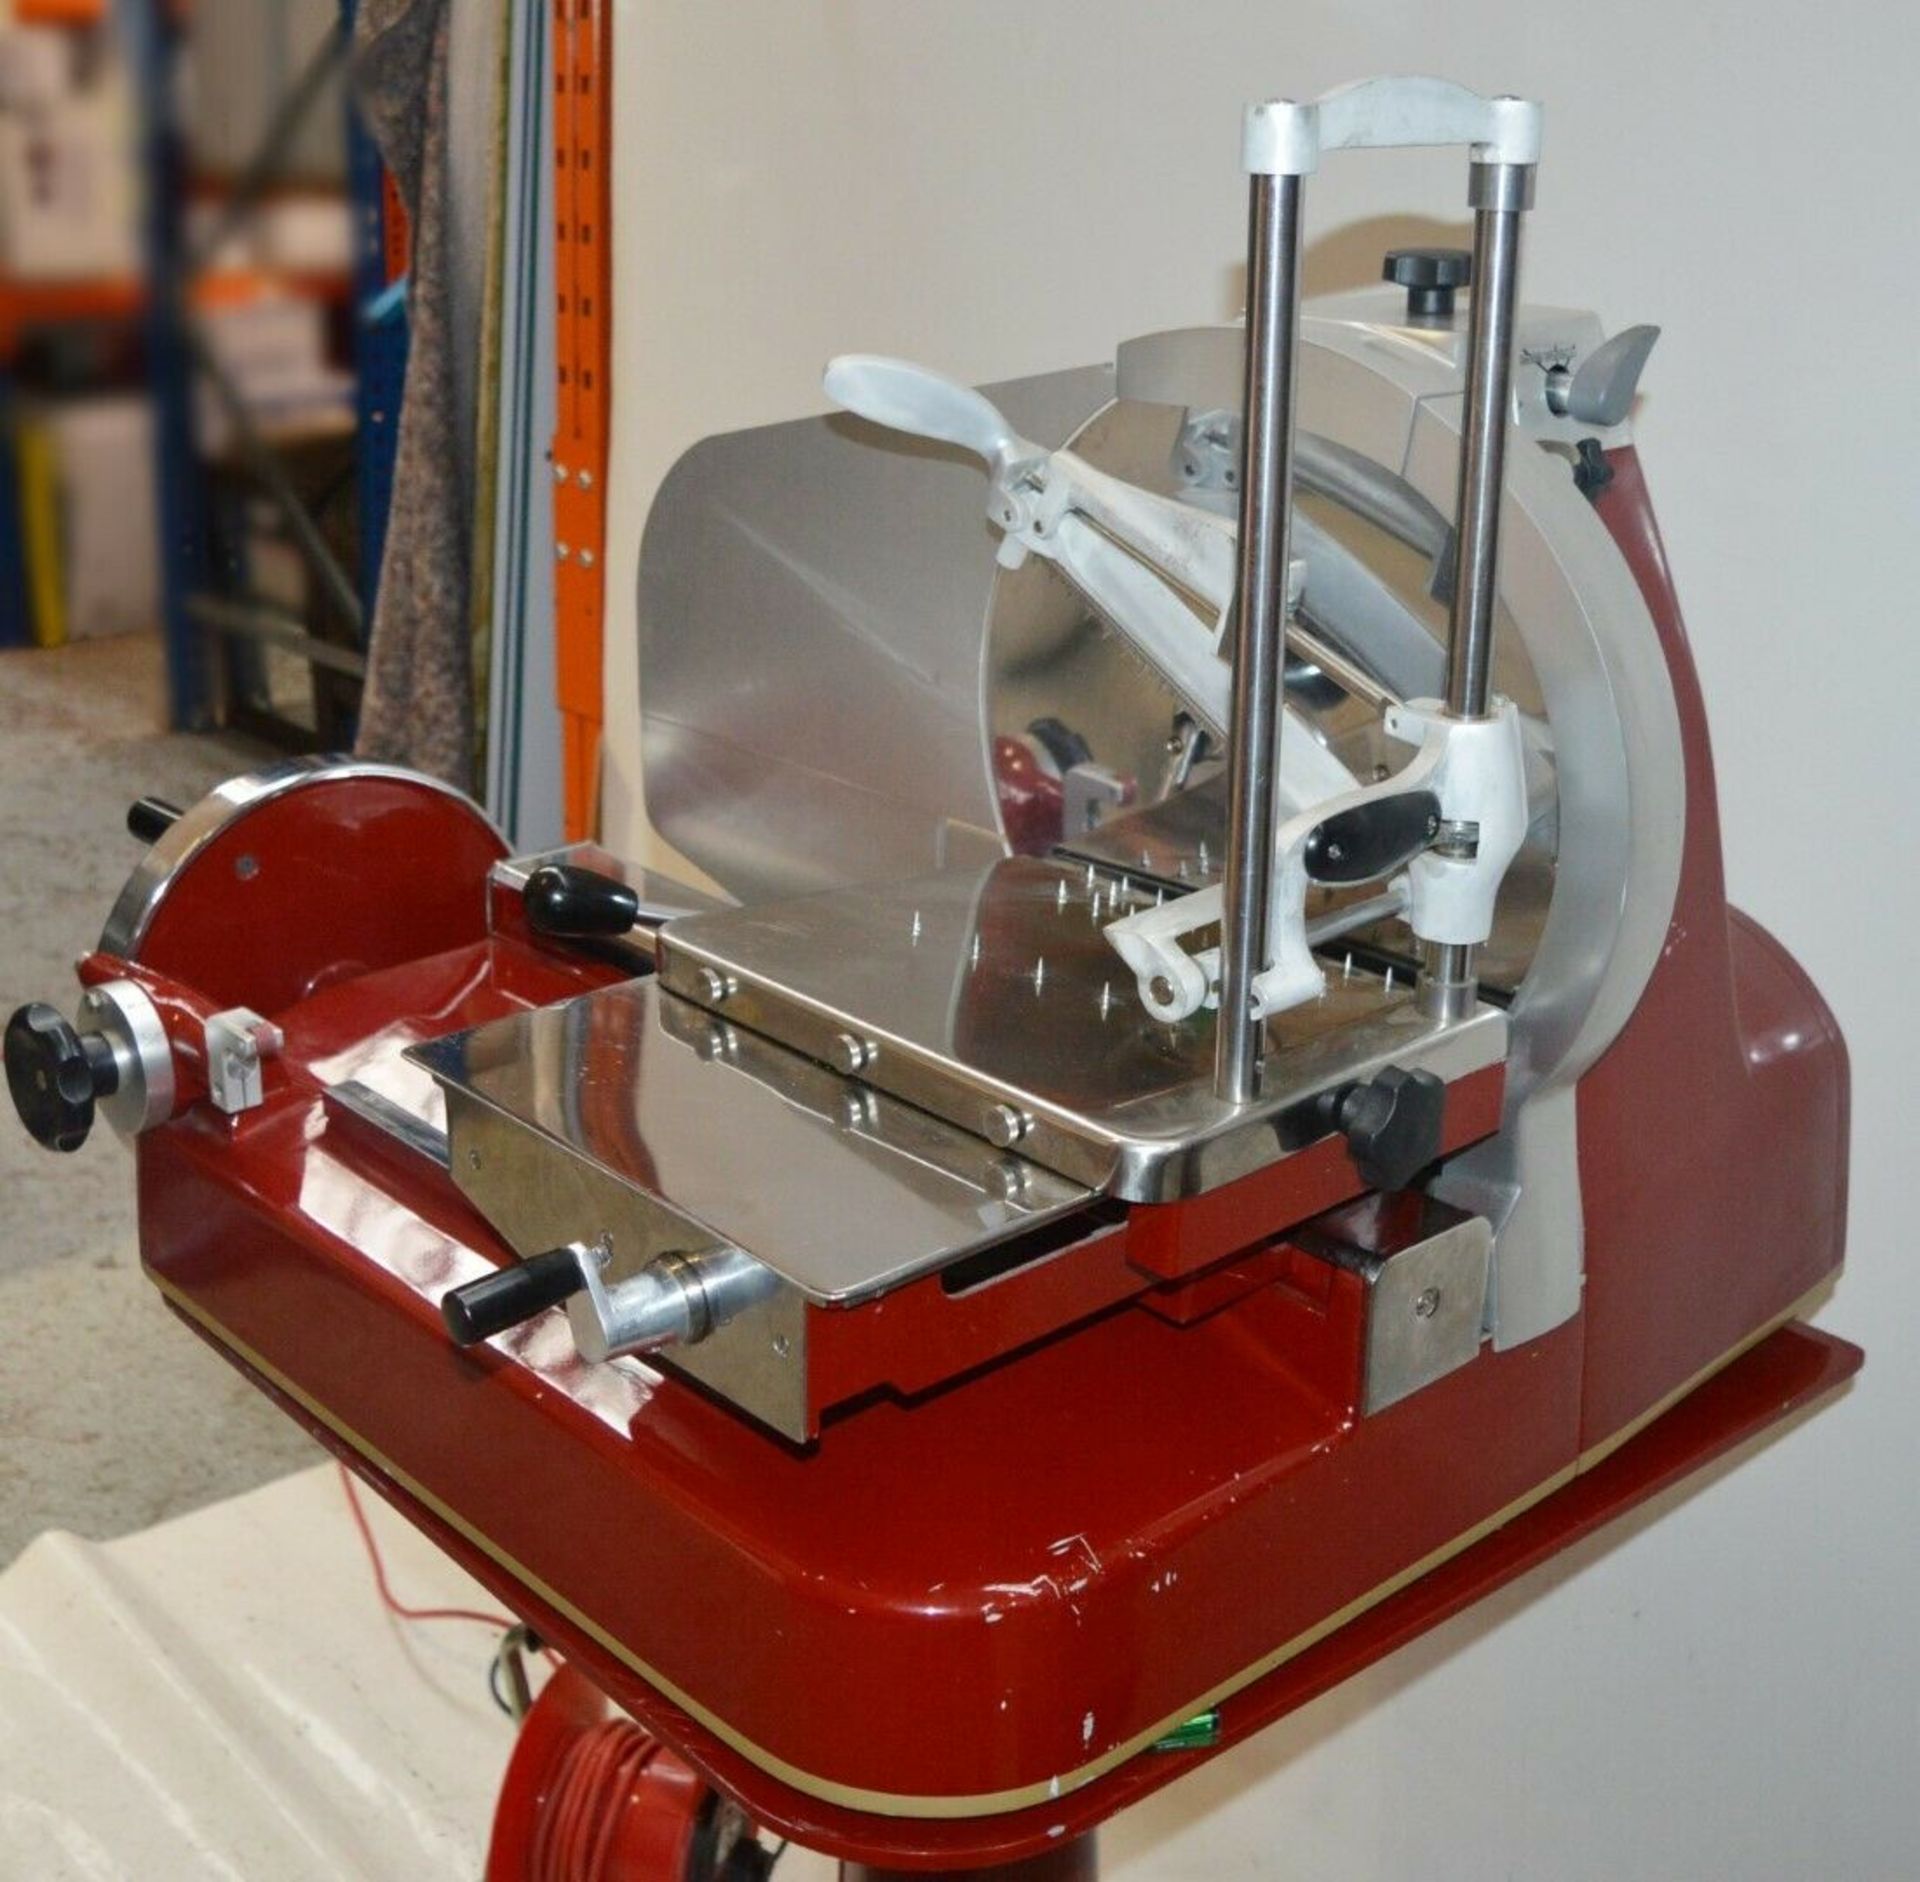 1 x Noaw 370mm Flywheel Meat / Prosciutto Slicer - Model 370/81CE220 - Ex M&S Made in Italy - - Image 2 of 9